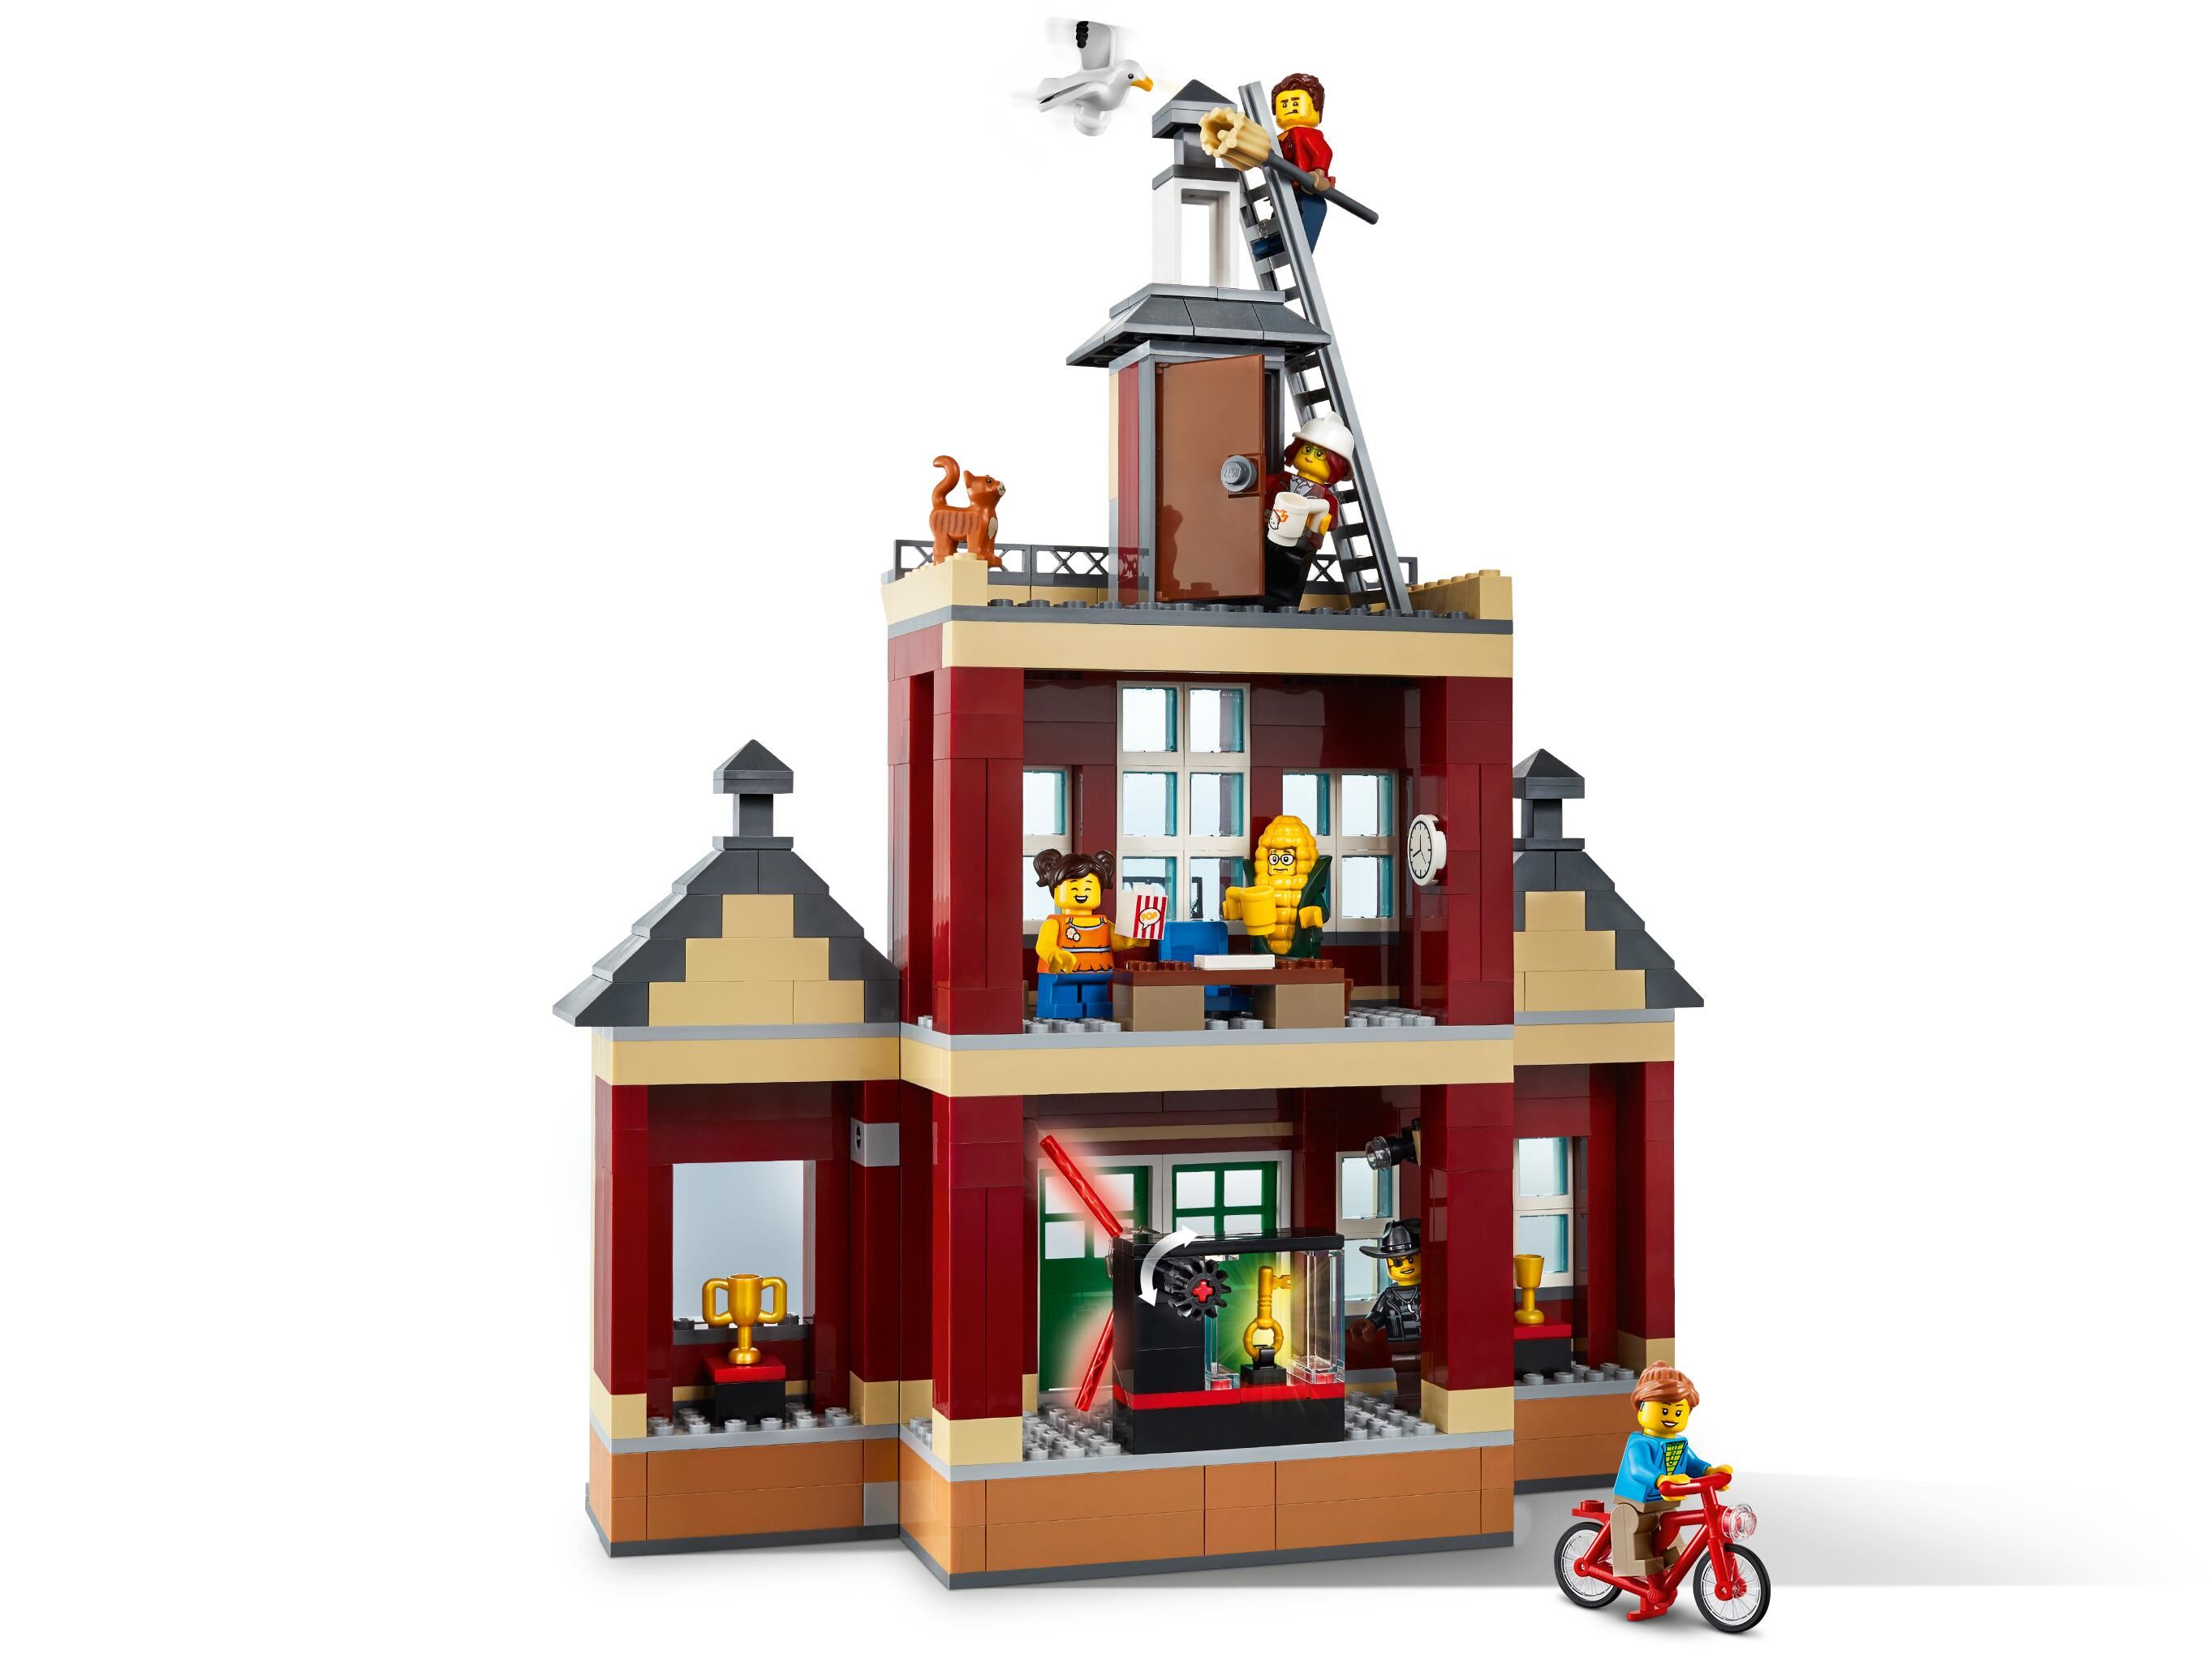 LEGO City Main Square 60271 Cool Building Toy for Kids (1,517 Pieces) 